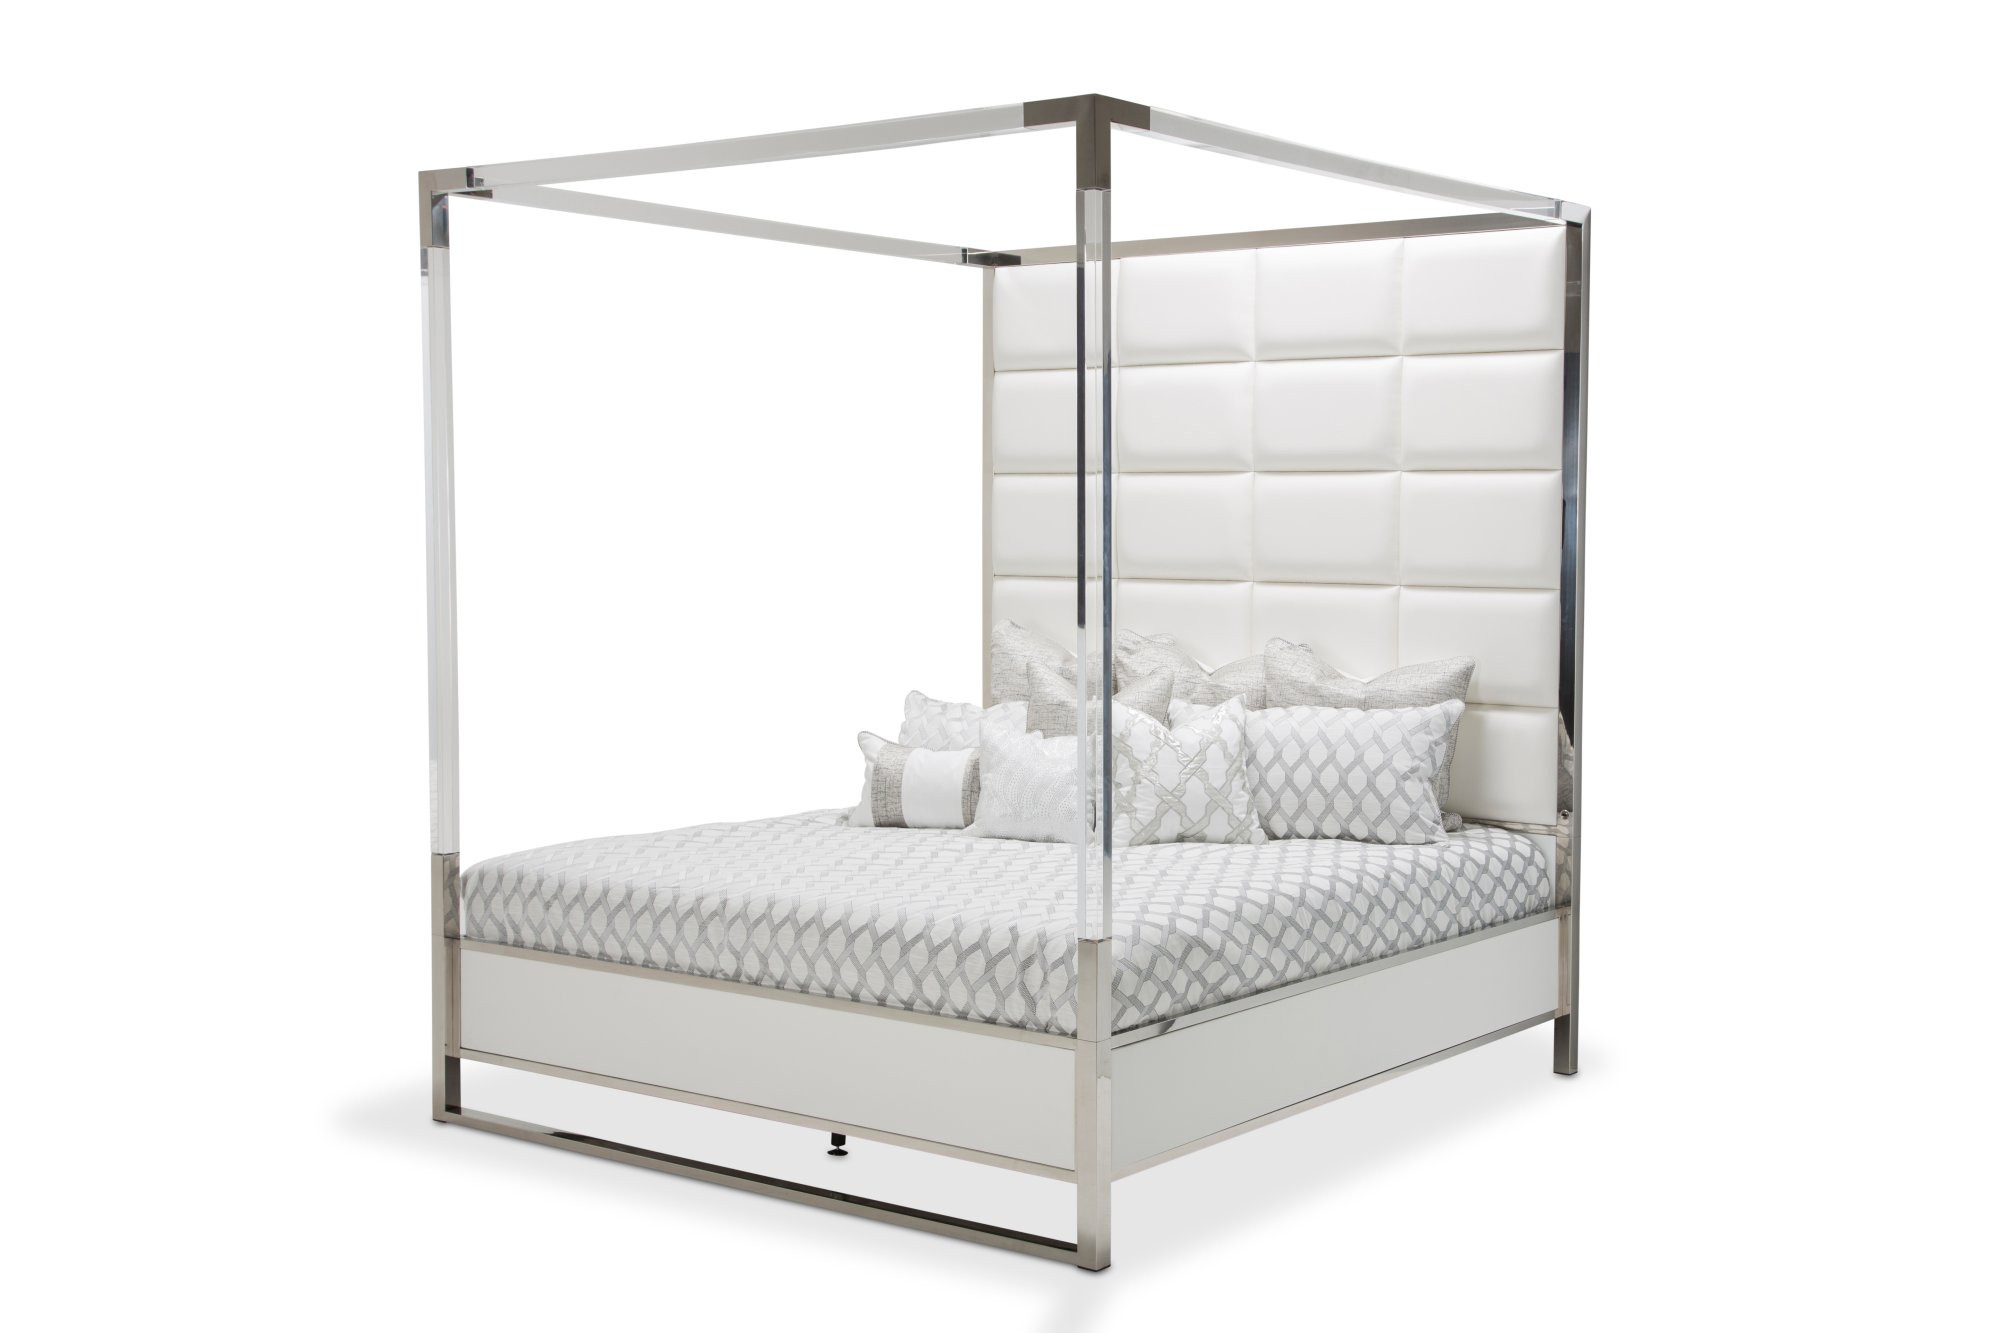 Cal King Metal Canopy Bed State, King Size Black Metal Canopy Bed